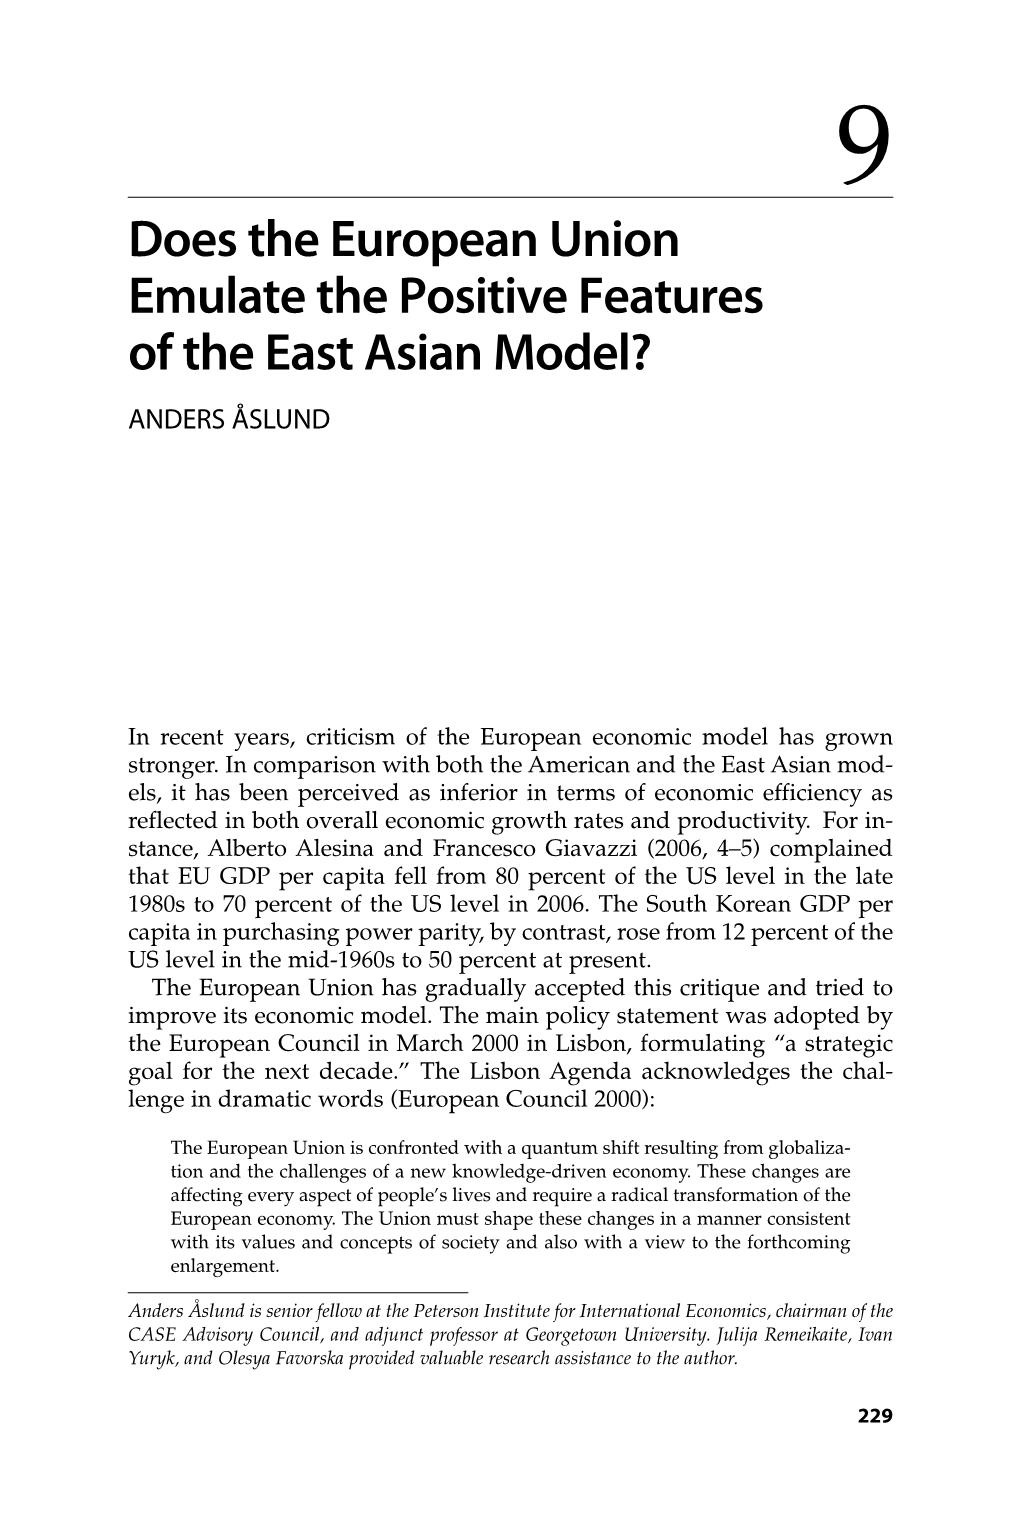 Does the European Union Emulate the Positive Features of the East Asian Model? ANDERS ÅSLUND